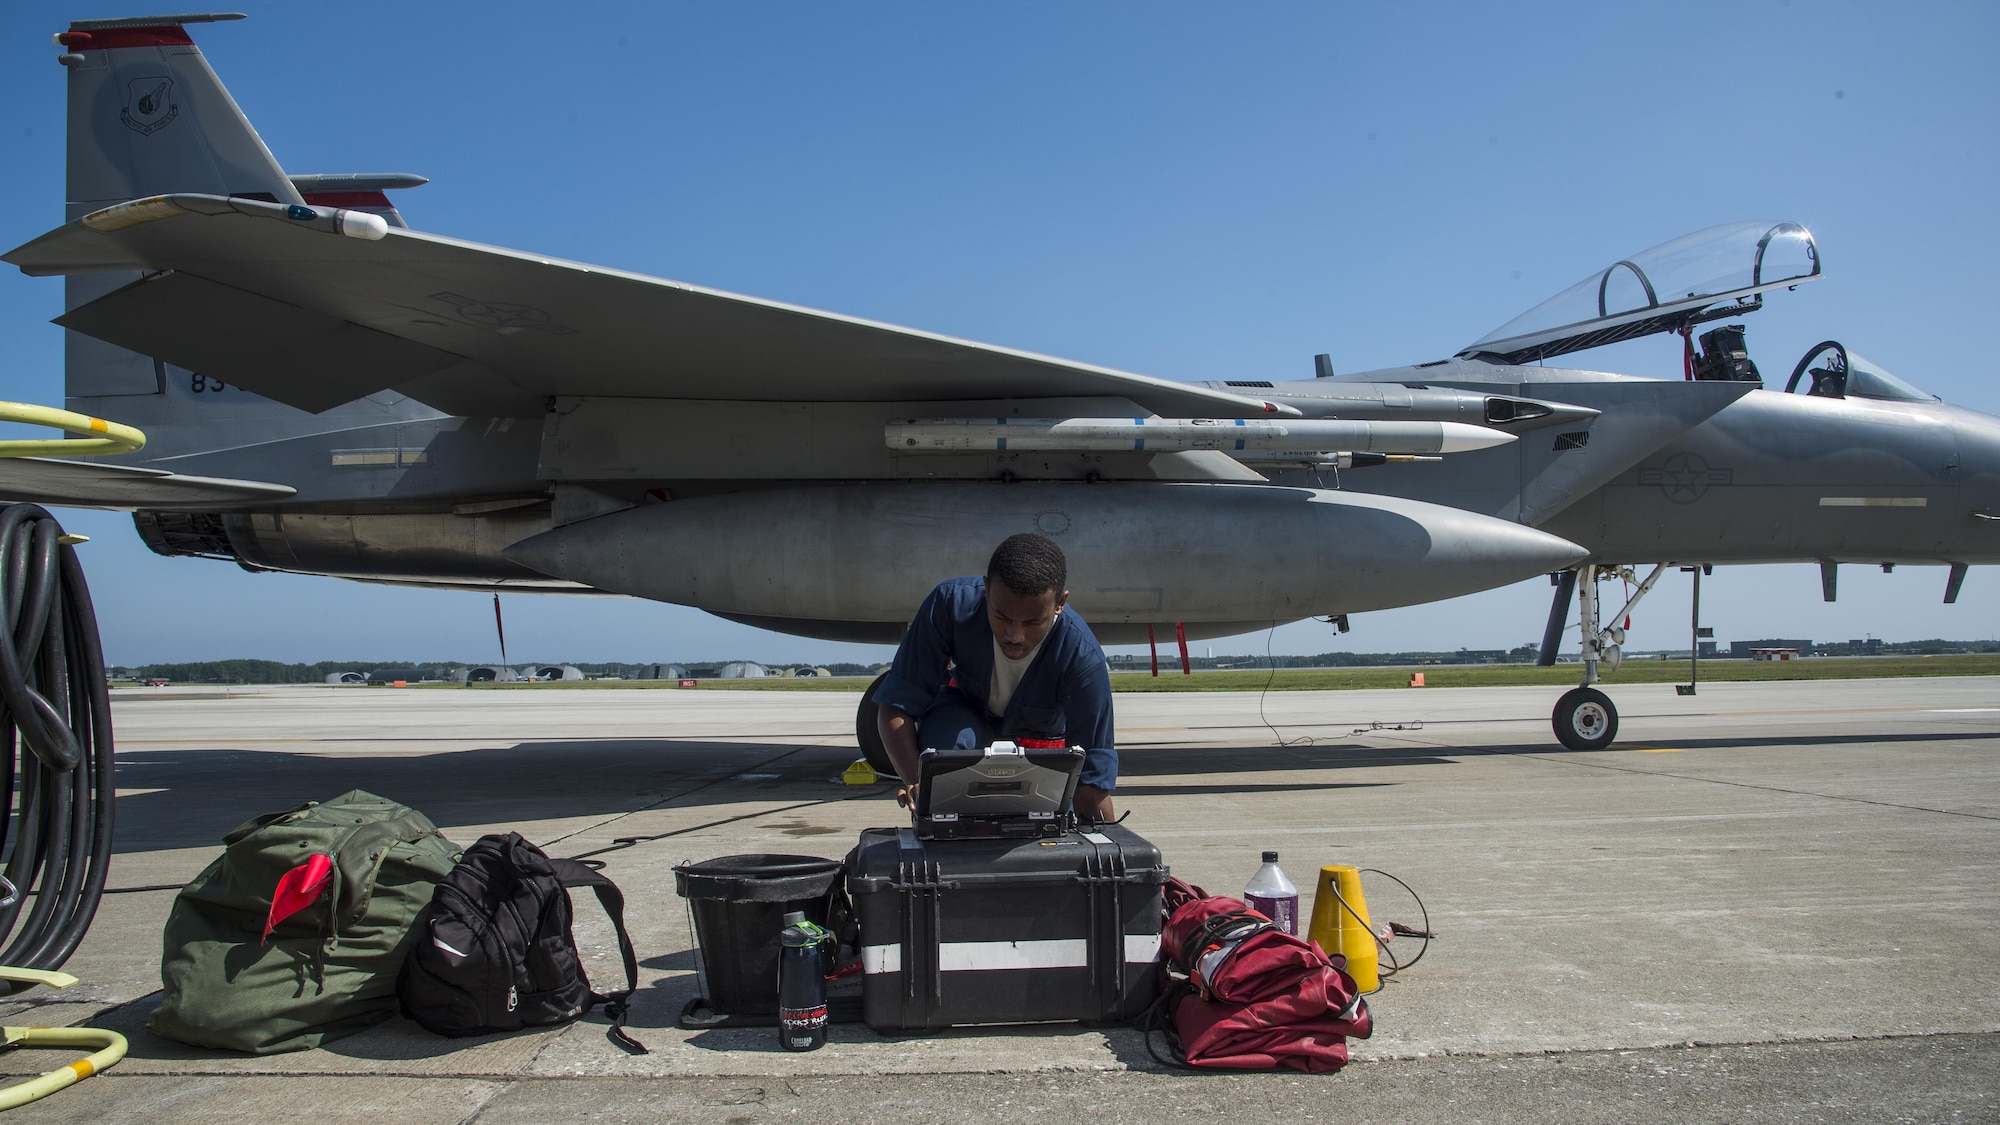 U.S. Air Force Senior Airman Devin Ross, an 18th Aircraft Maintenance Squadron crew chief, conducts preflight procedures prior to an F-15C Eagle flight at Misawa Air Base, Japan, June 13, 2017. Due to its strategic location in northern Japan, Misawa AB is a hub for contingency operations for airframes and units forward deployed across the Indo-Asia-Pacific region. It is important during trainings like these to test the abilities of the pilots and maintainers who work alongside the aircraft. Ross is assigned to Kadena Air Base, Japan. (U.S. Air Force photo by Staff Sgt. Deana Heitzman)